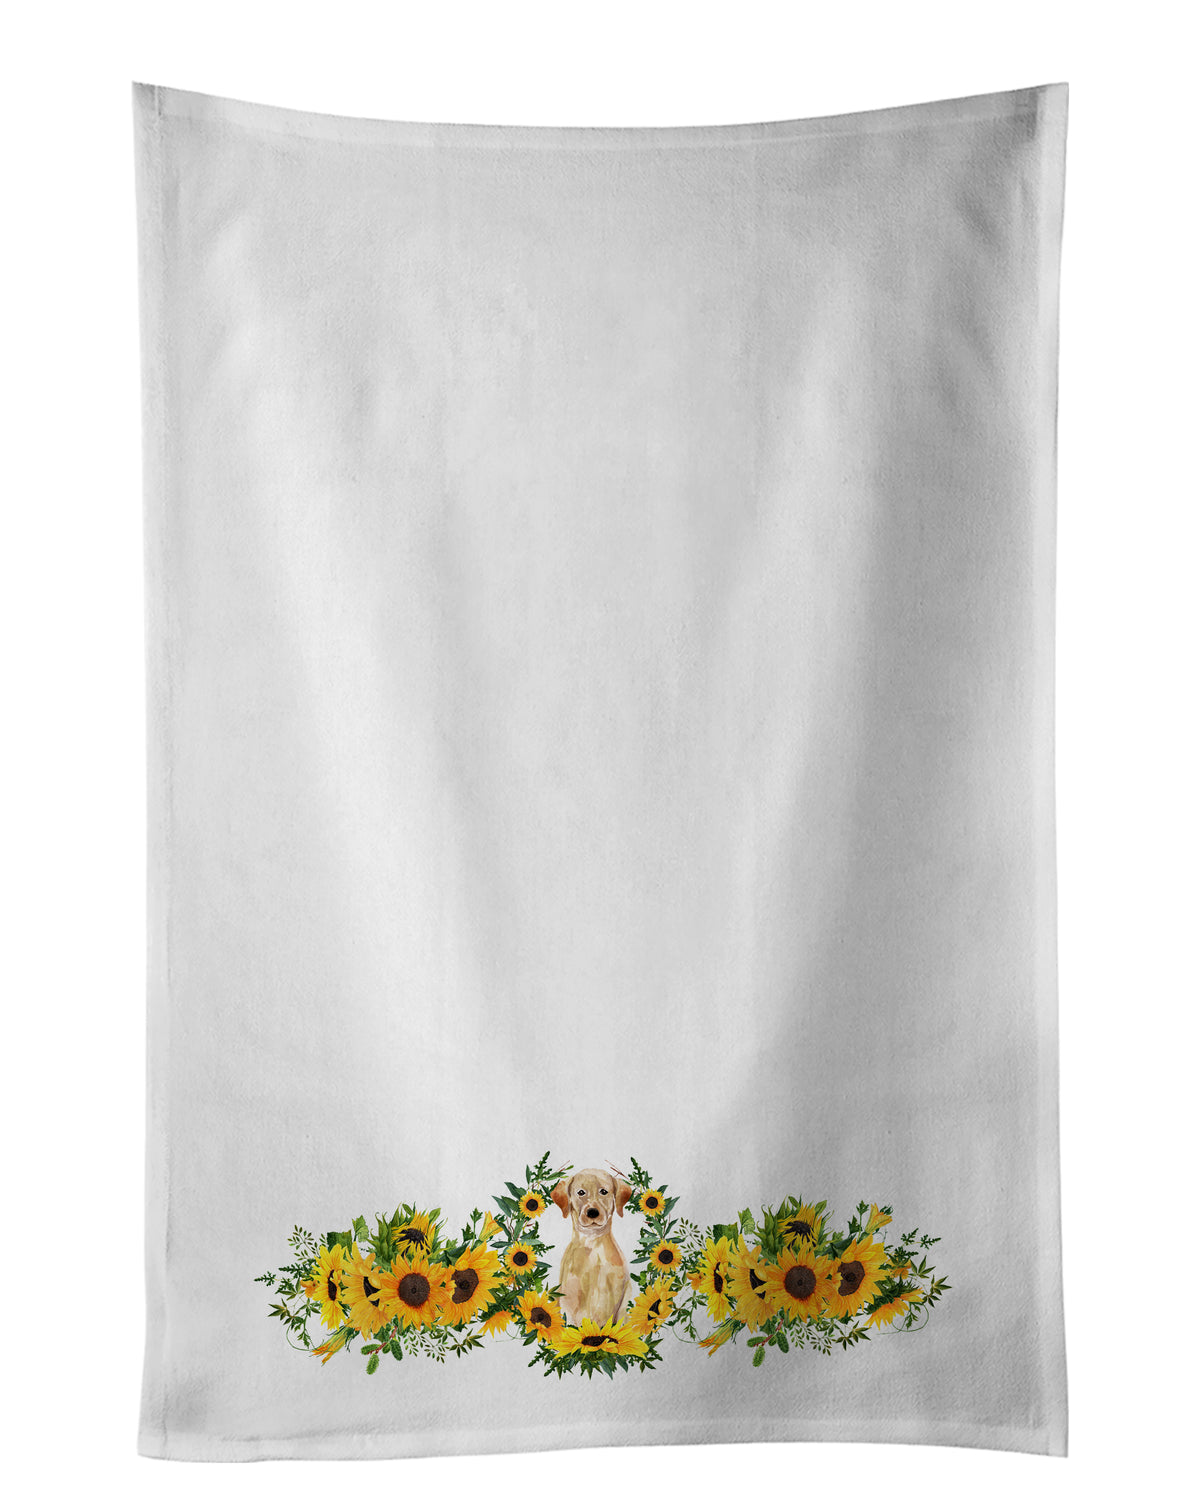 Buy this Yellow Labrador Retriever in Sunflowers White Kitchen Towel Set of 2